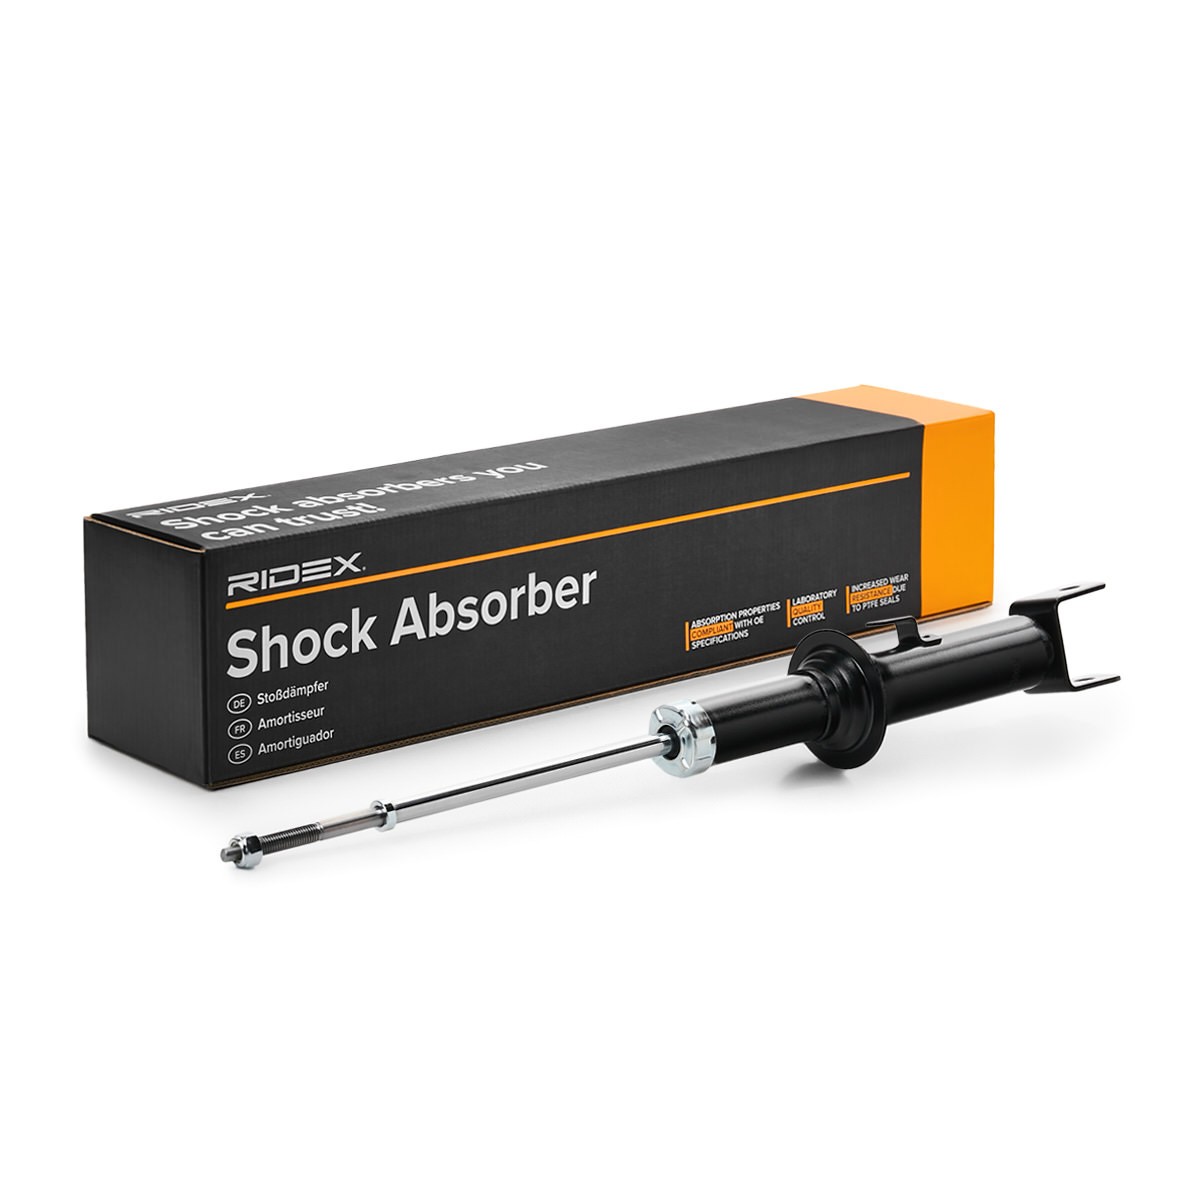 RIDEX 854S1411 Shock absorber DODGE experience and price